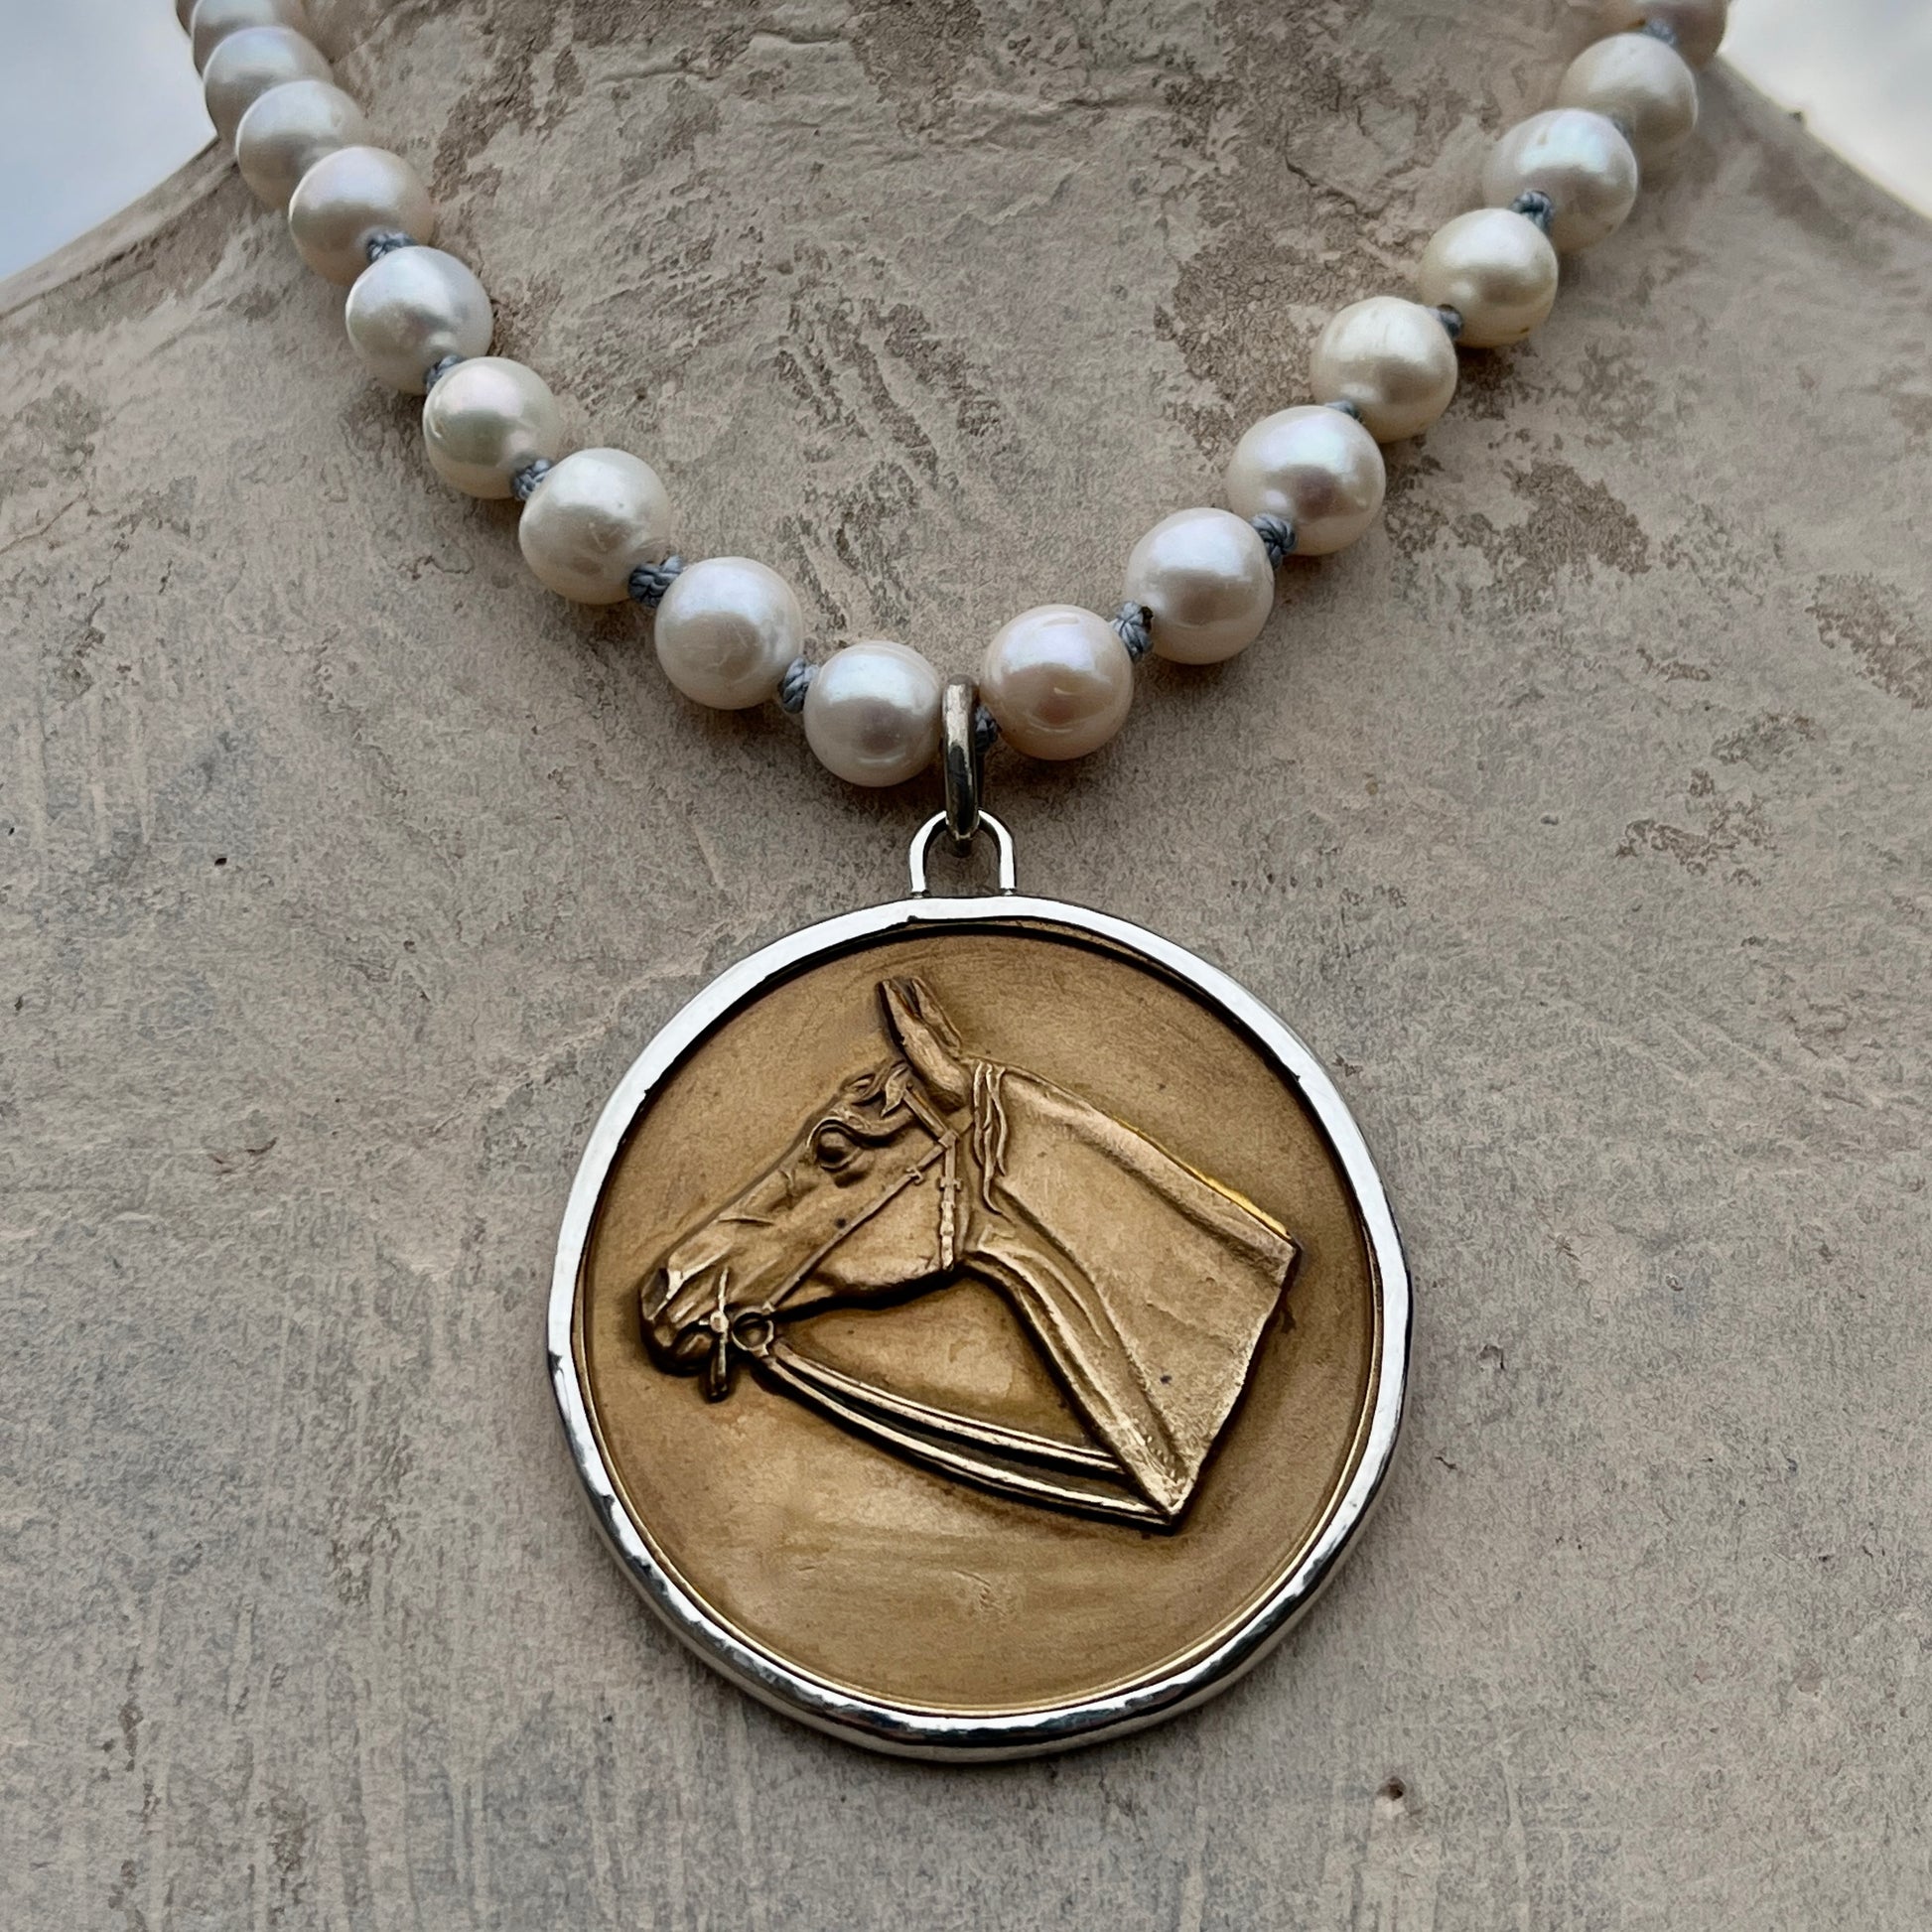 Vintage Horse Head Medal on Pearl Necklace